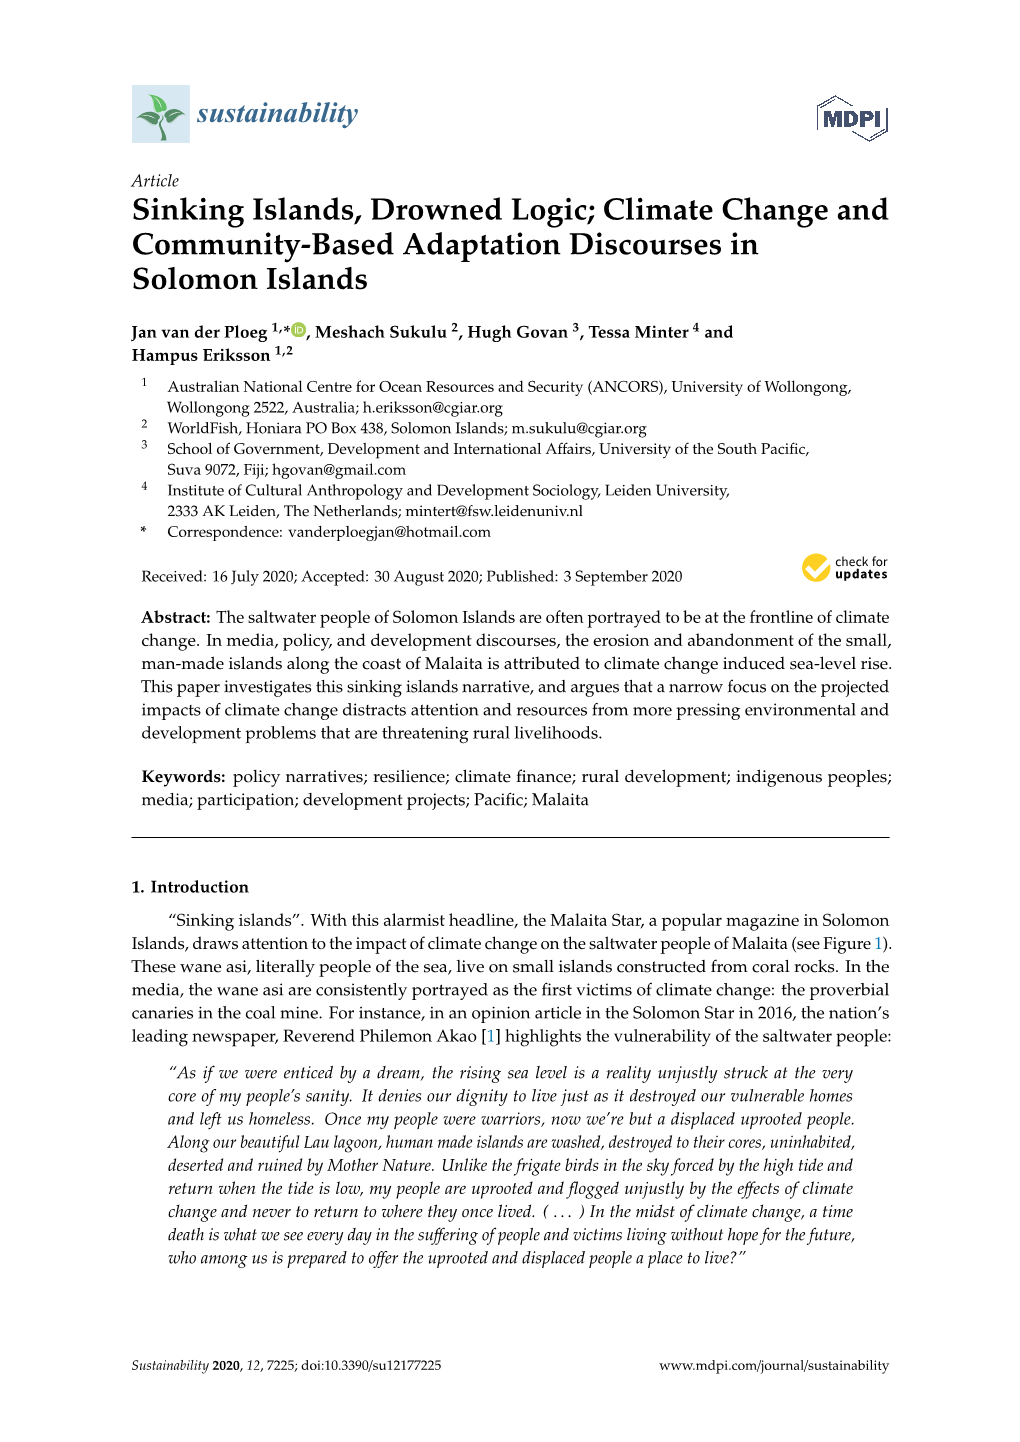 Climate Change and Community-Based Adaptation Discourses in Solomon Islands